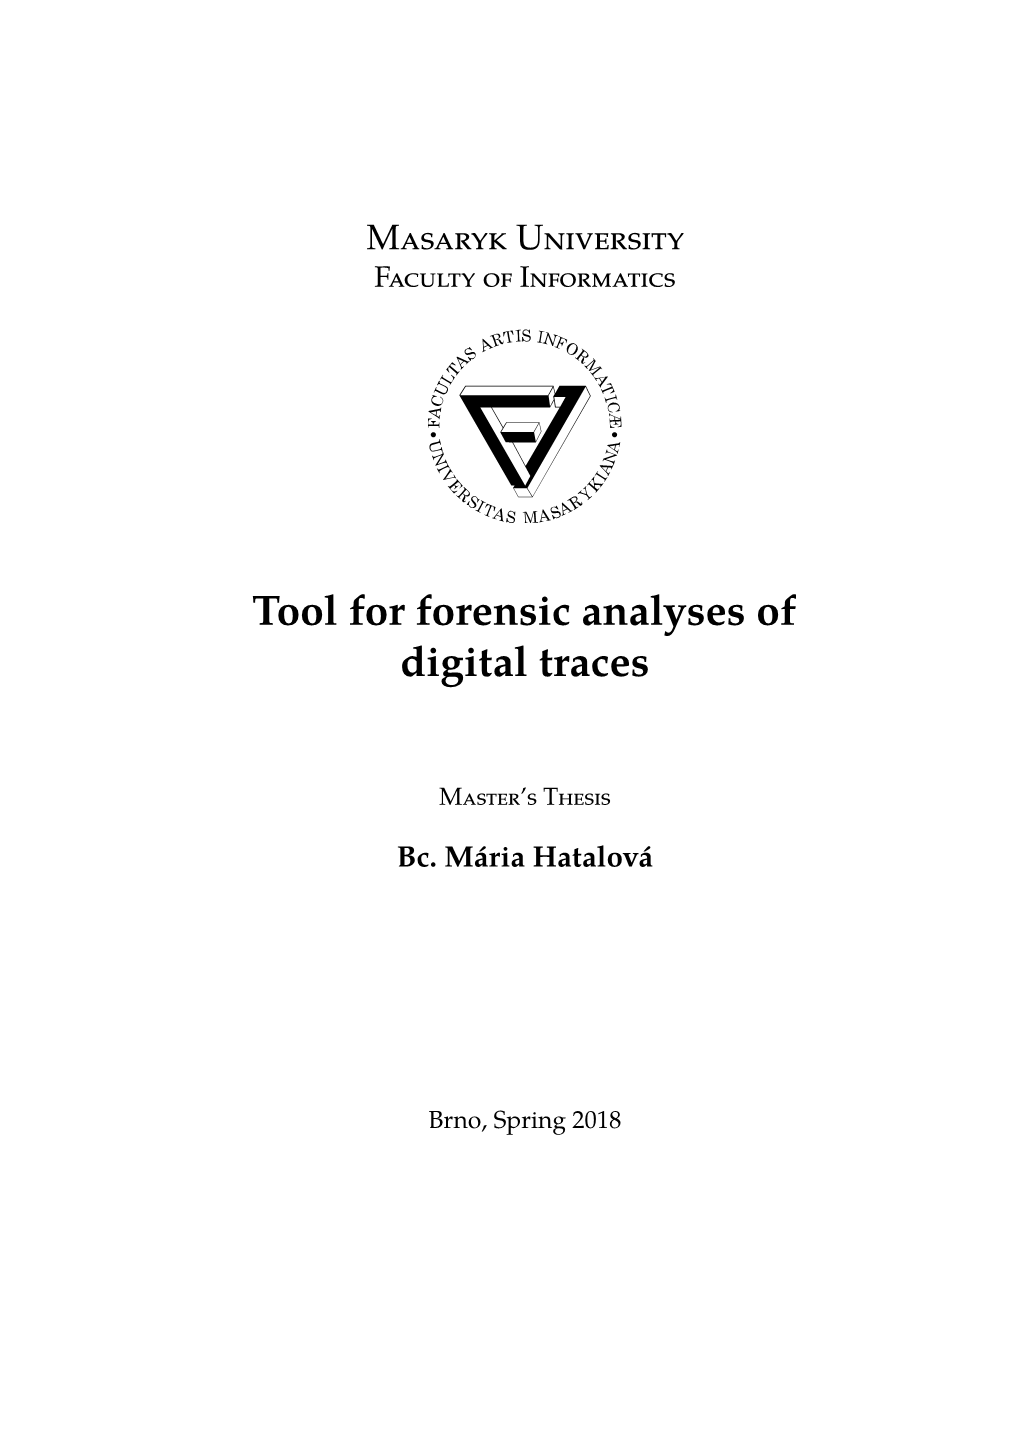 Tool for Forensic Analyses of Digital Traces